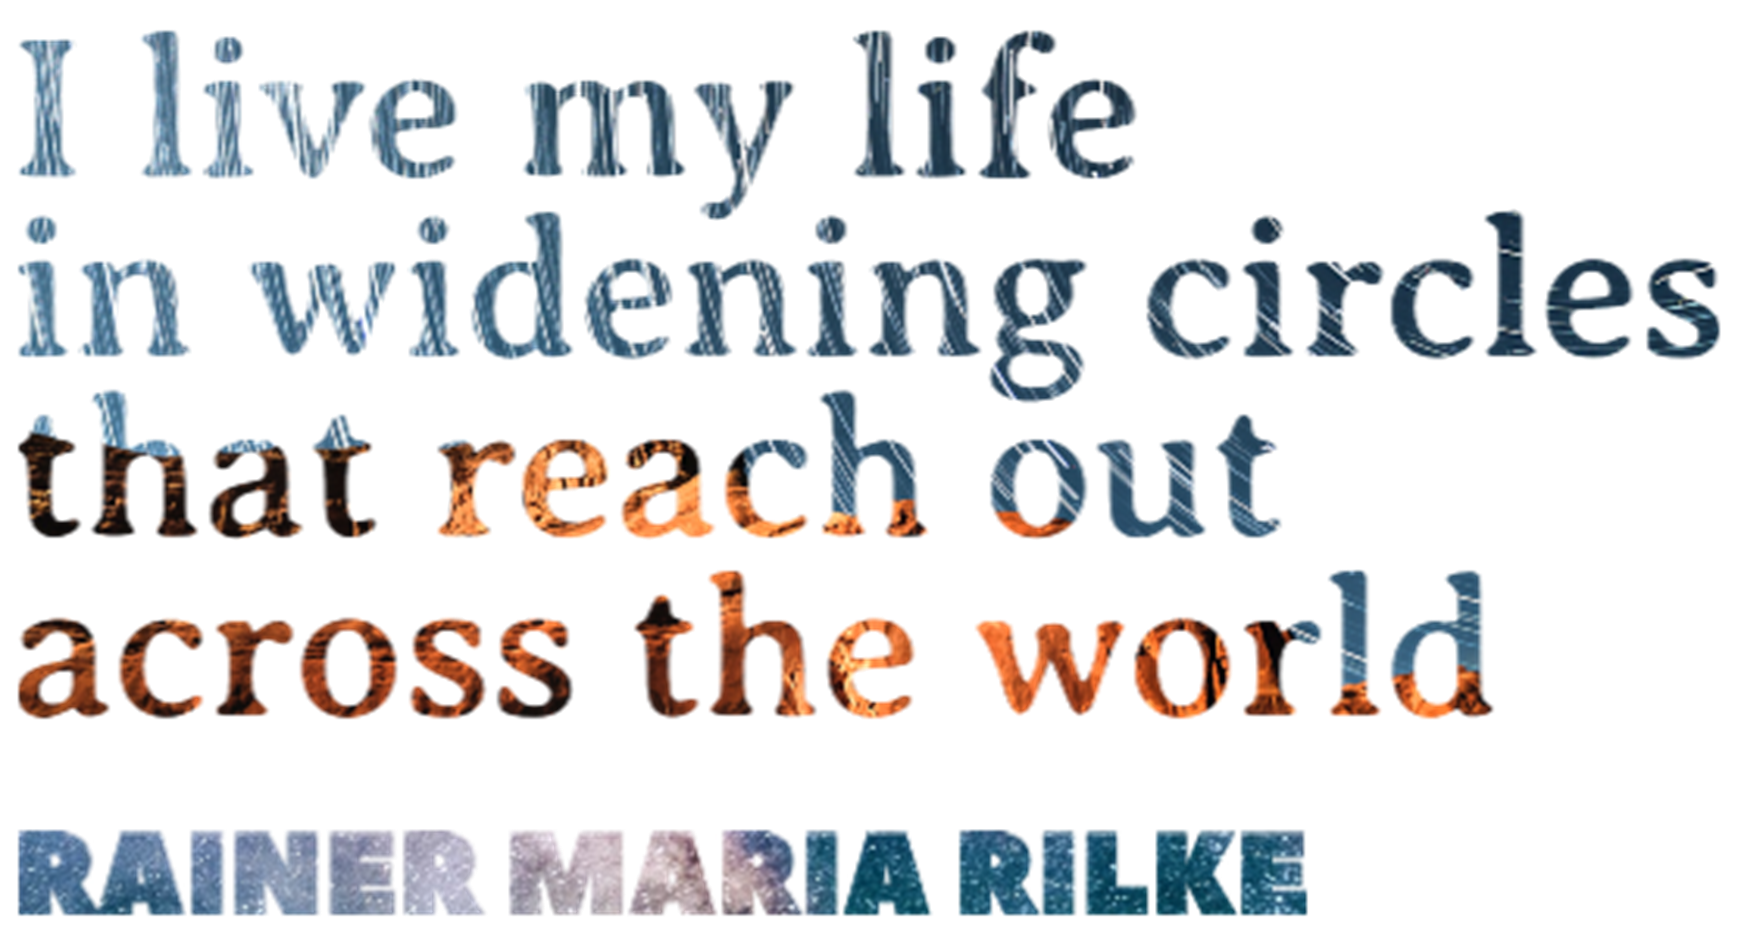 Graphic with text: "I live my life in widening circles that reach out across the world" by Rainer Maria Rilke